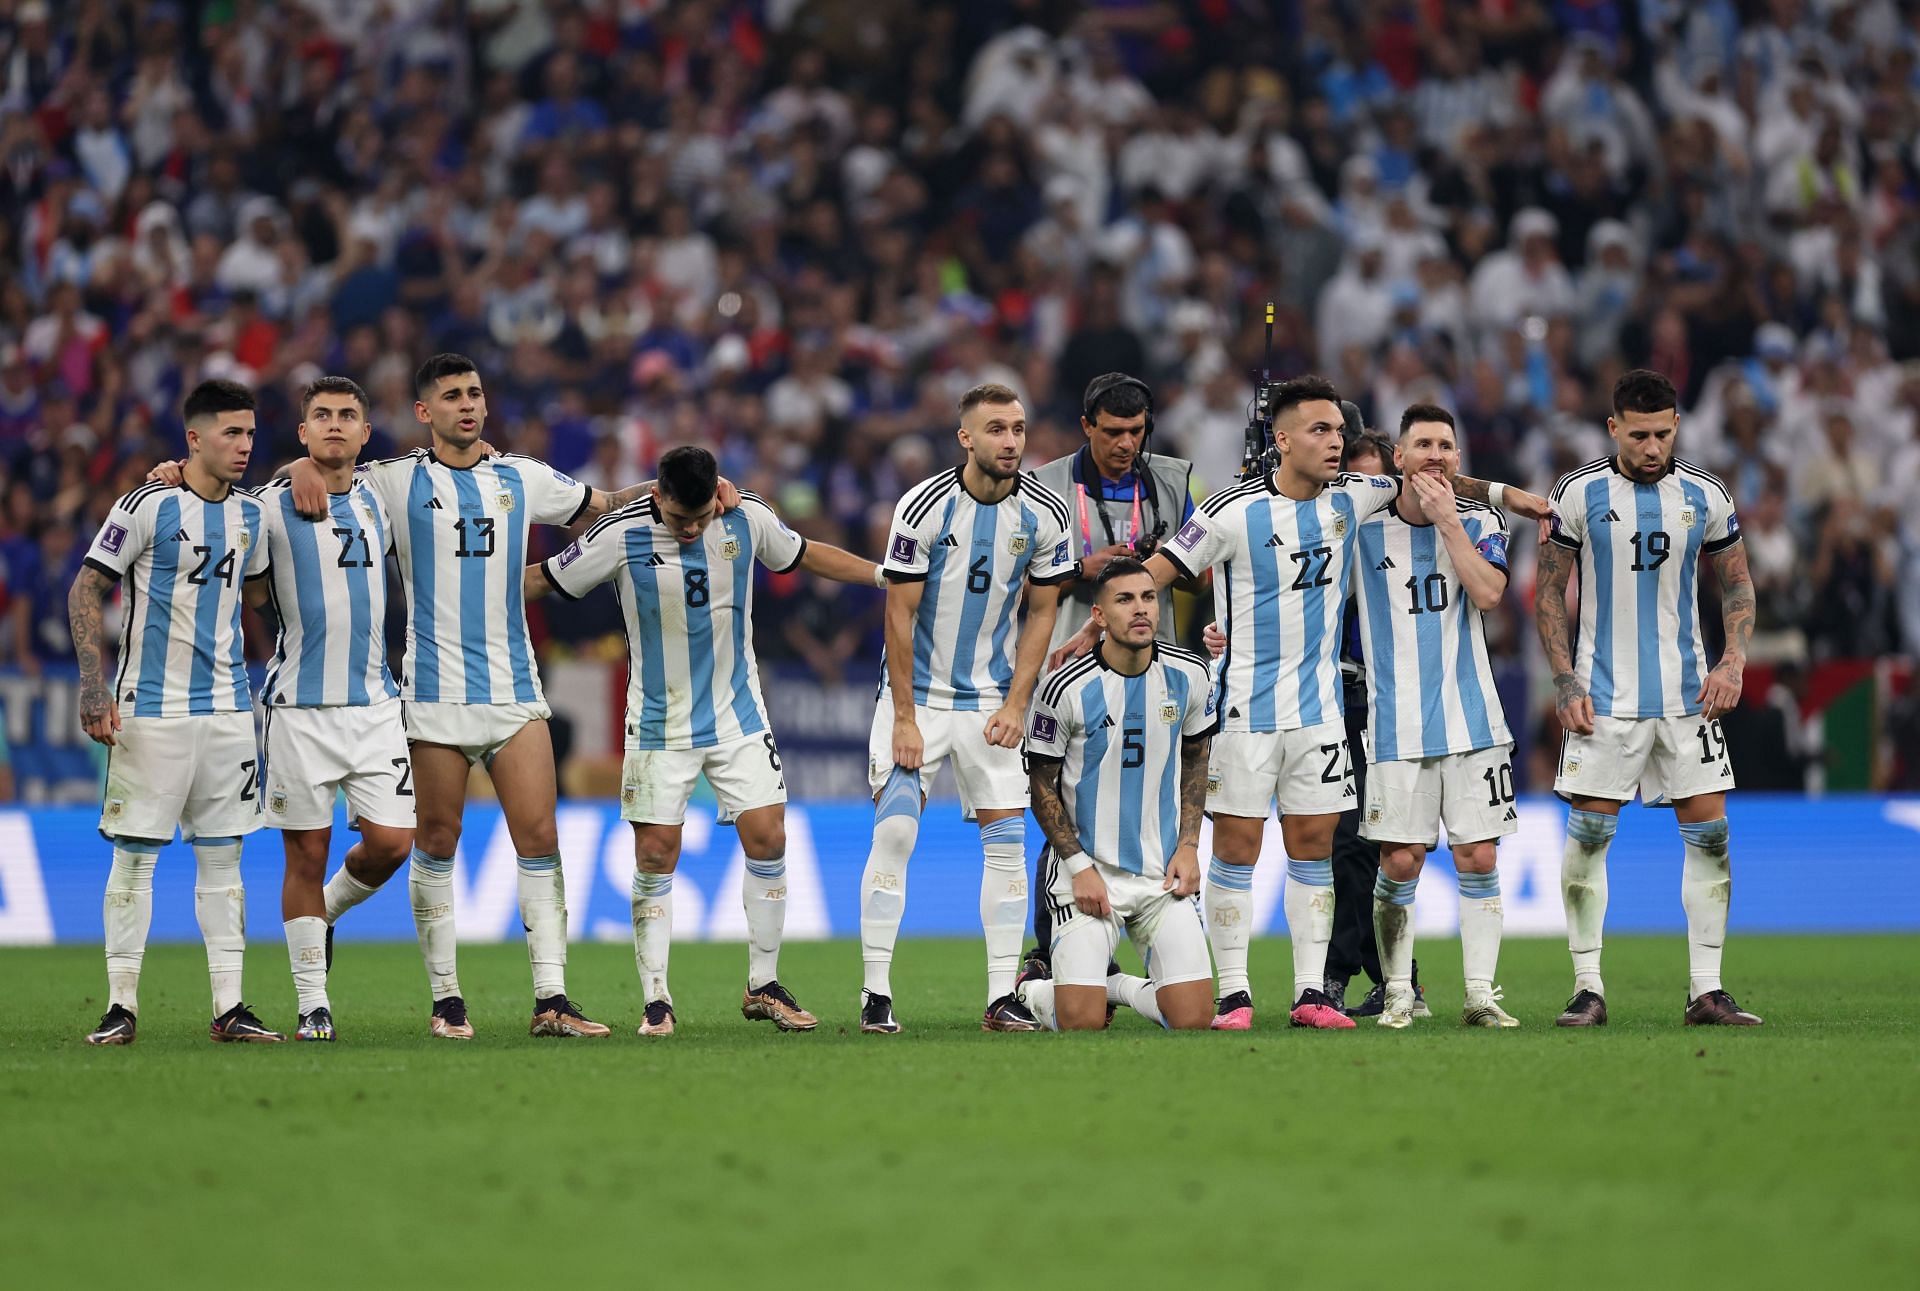 Argentina had stronger squads in previous editions of the World Cup.